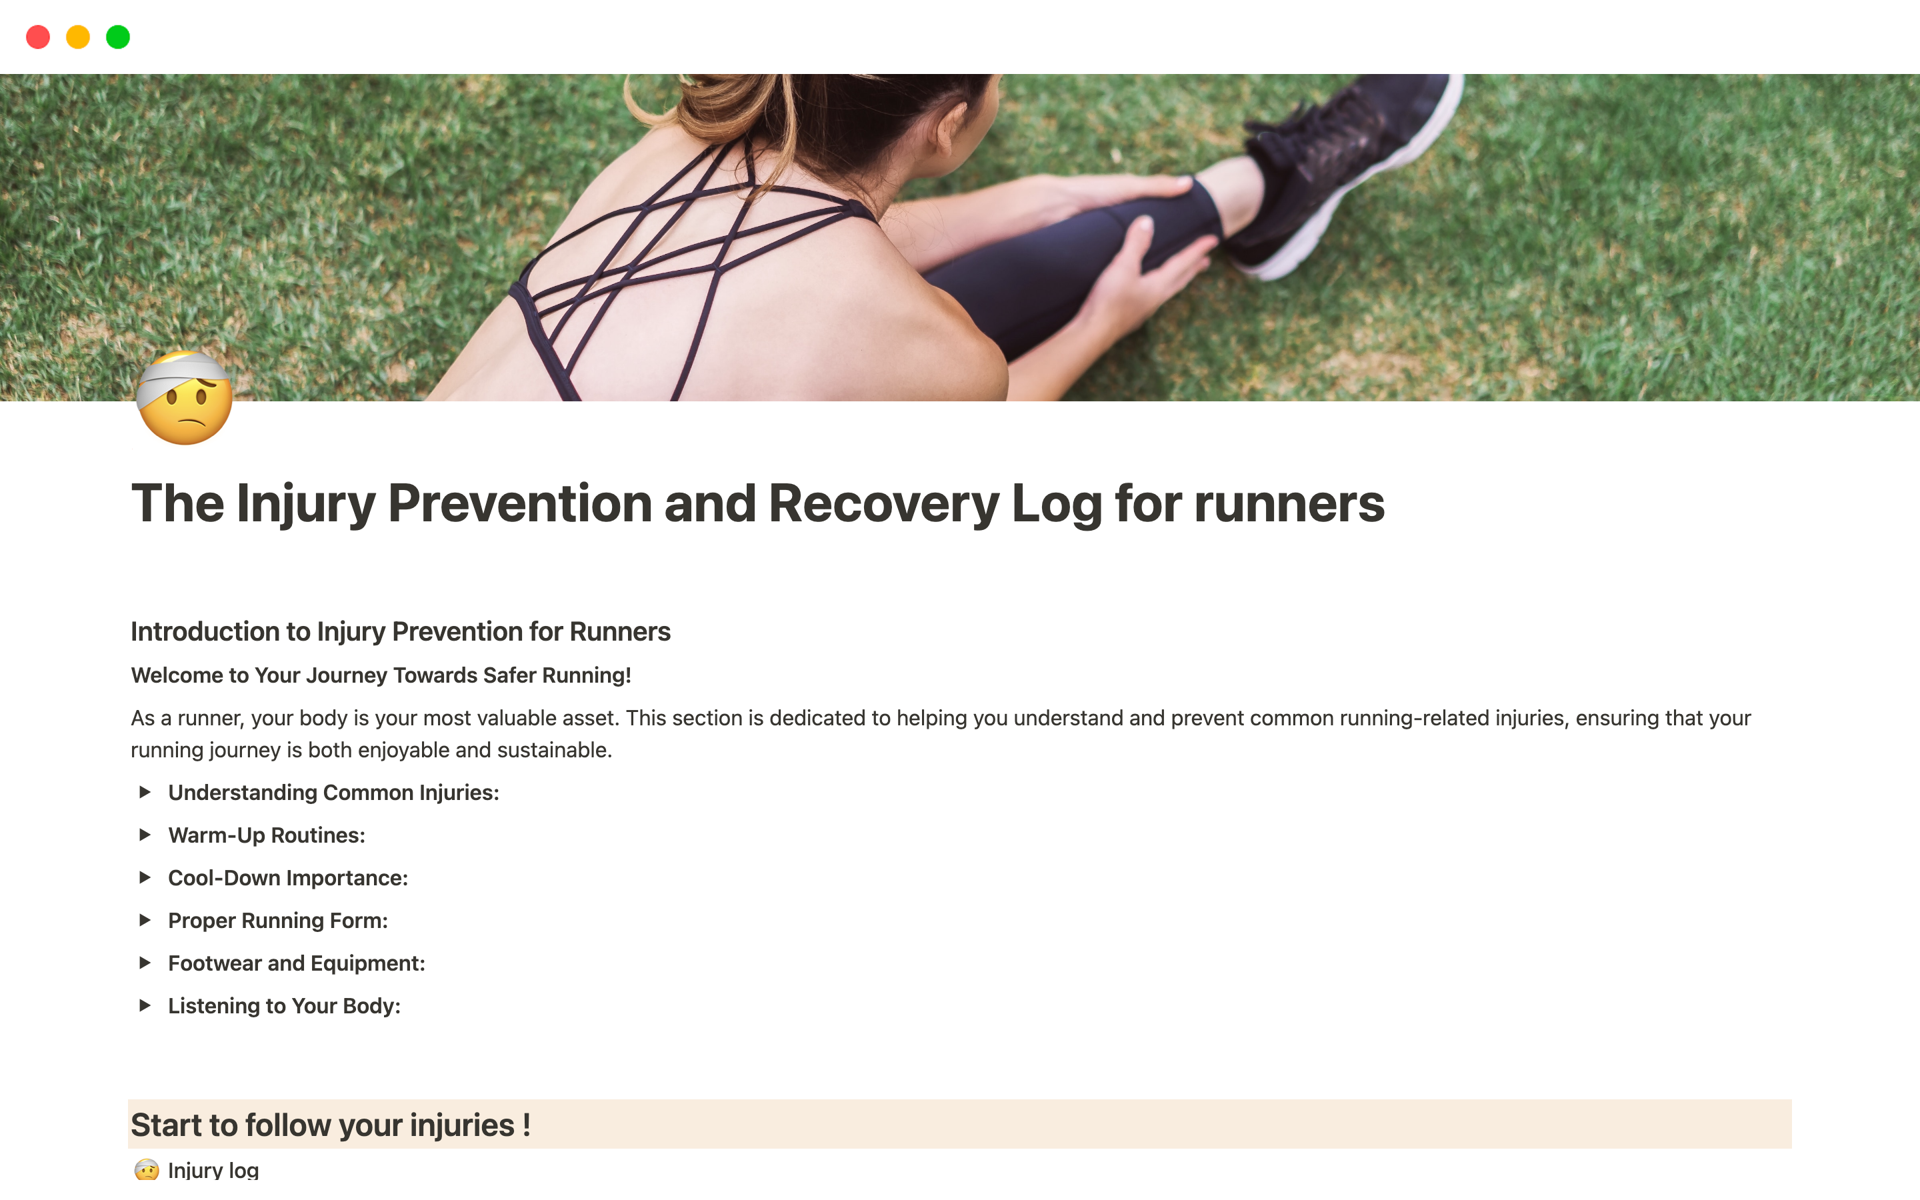 Mallin esikatselu nimelle The Injury Prevention and Recovery Log for runners